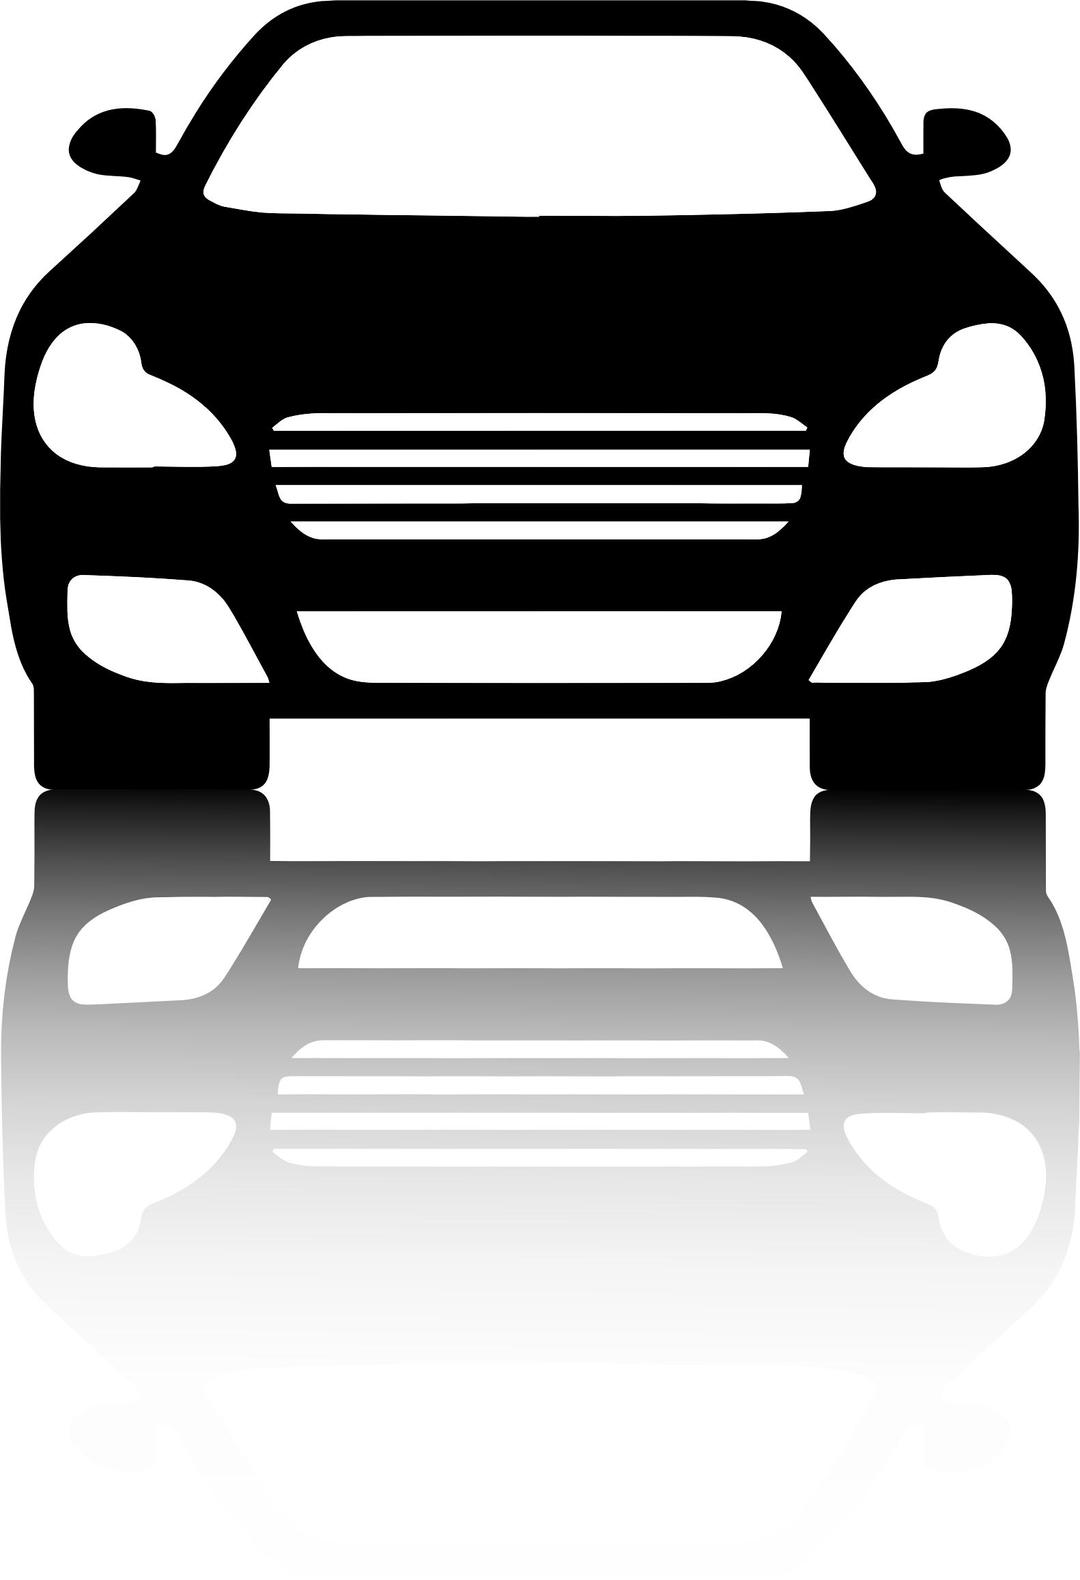 Black Car Front View With Shadow png transparent